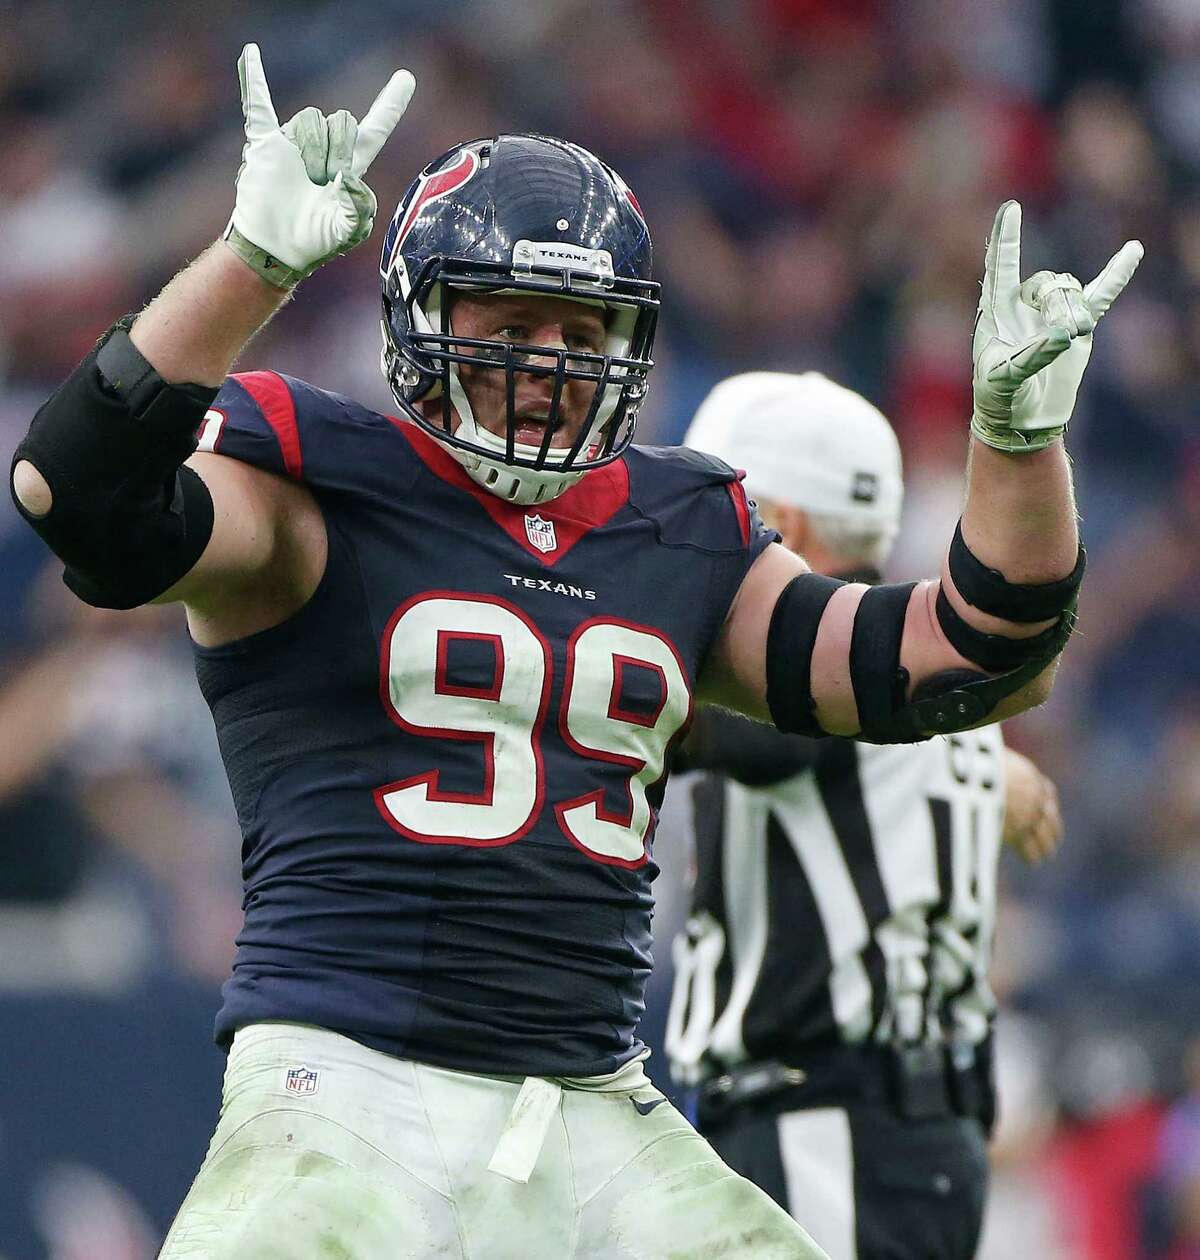 Times when J.J. Watt made headlines Defensive end J.J. Watt loomed large in the Houston sports landscape this year. See how the Texans star stayed on our radar this year.